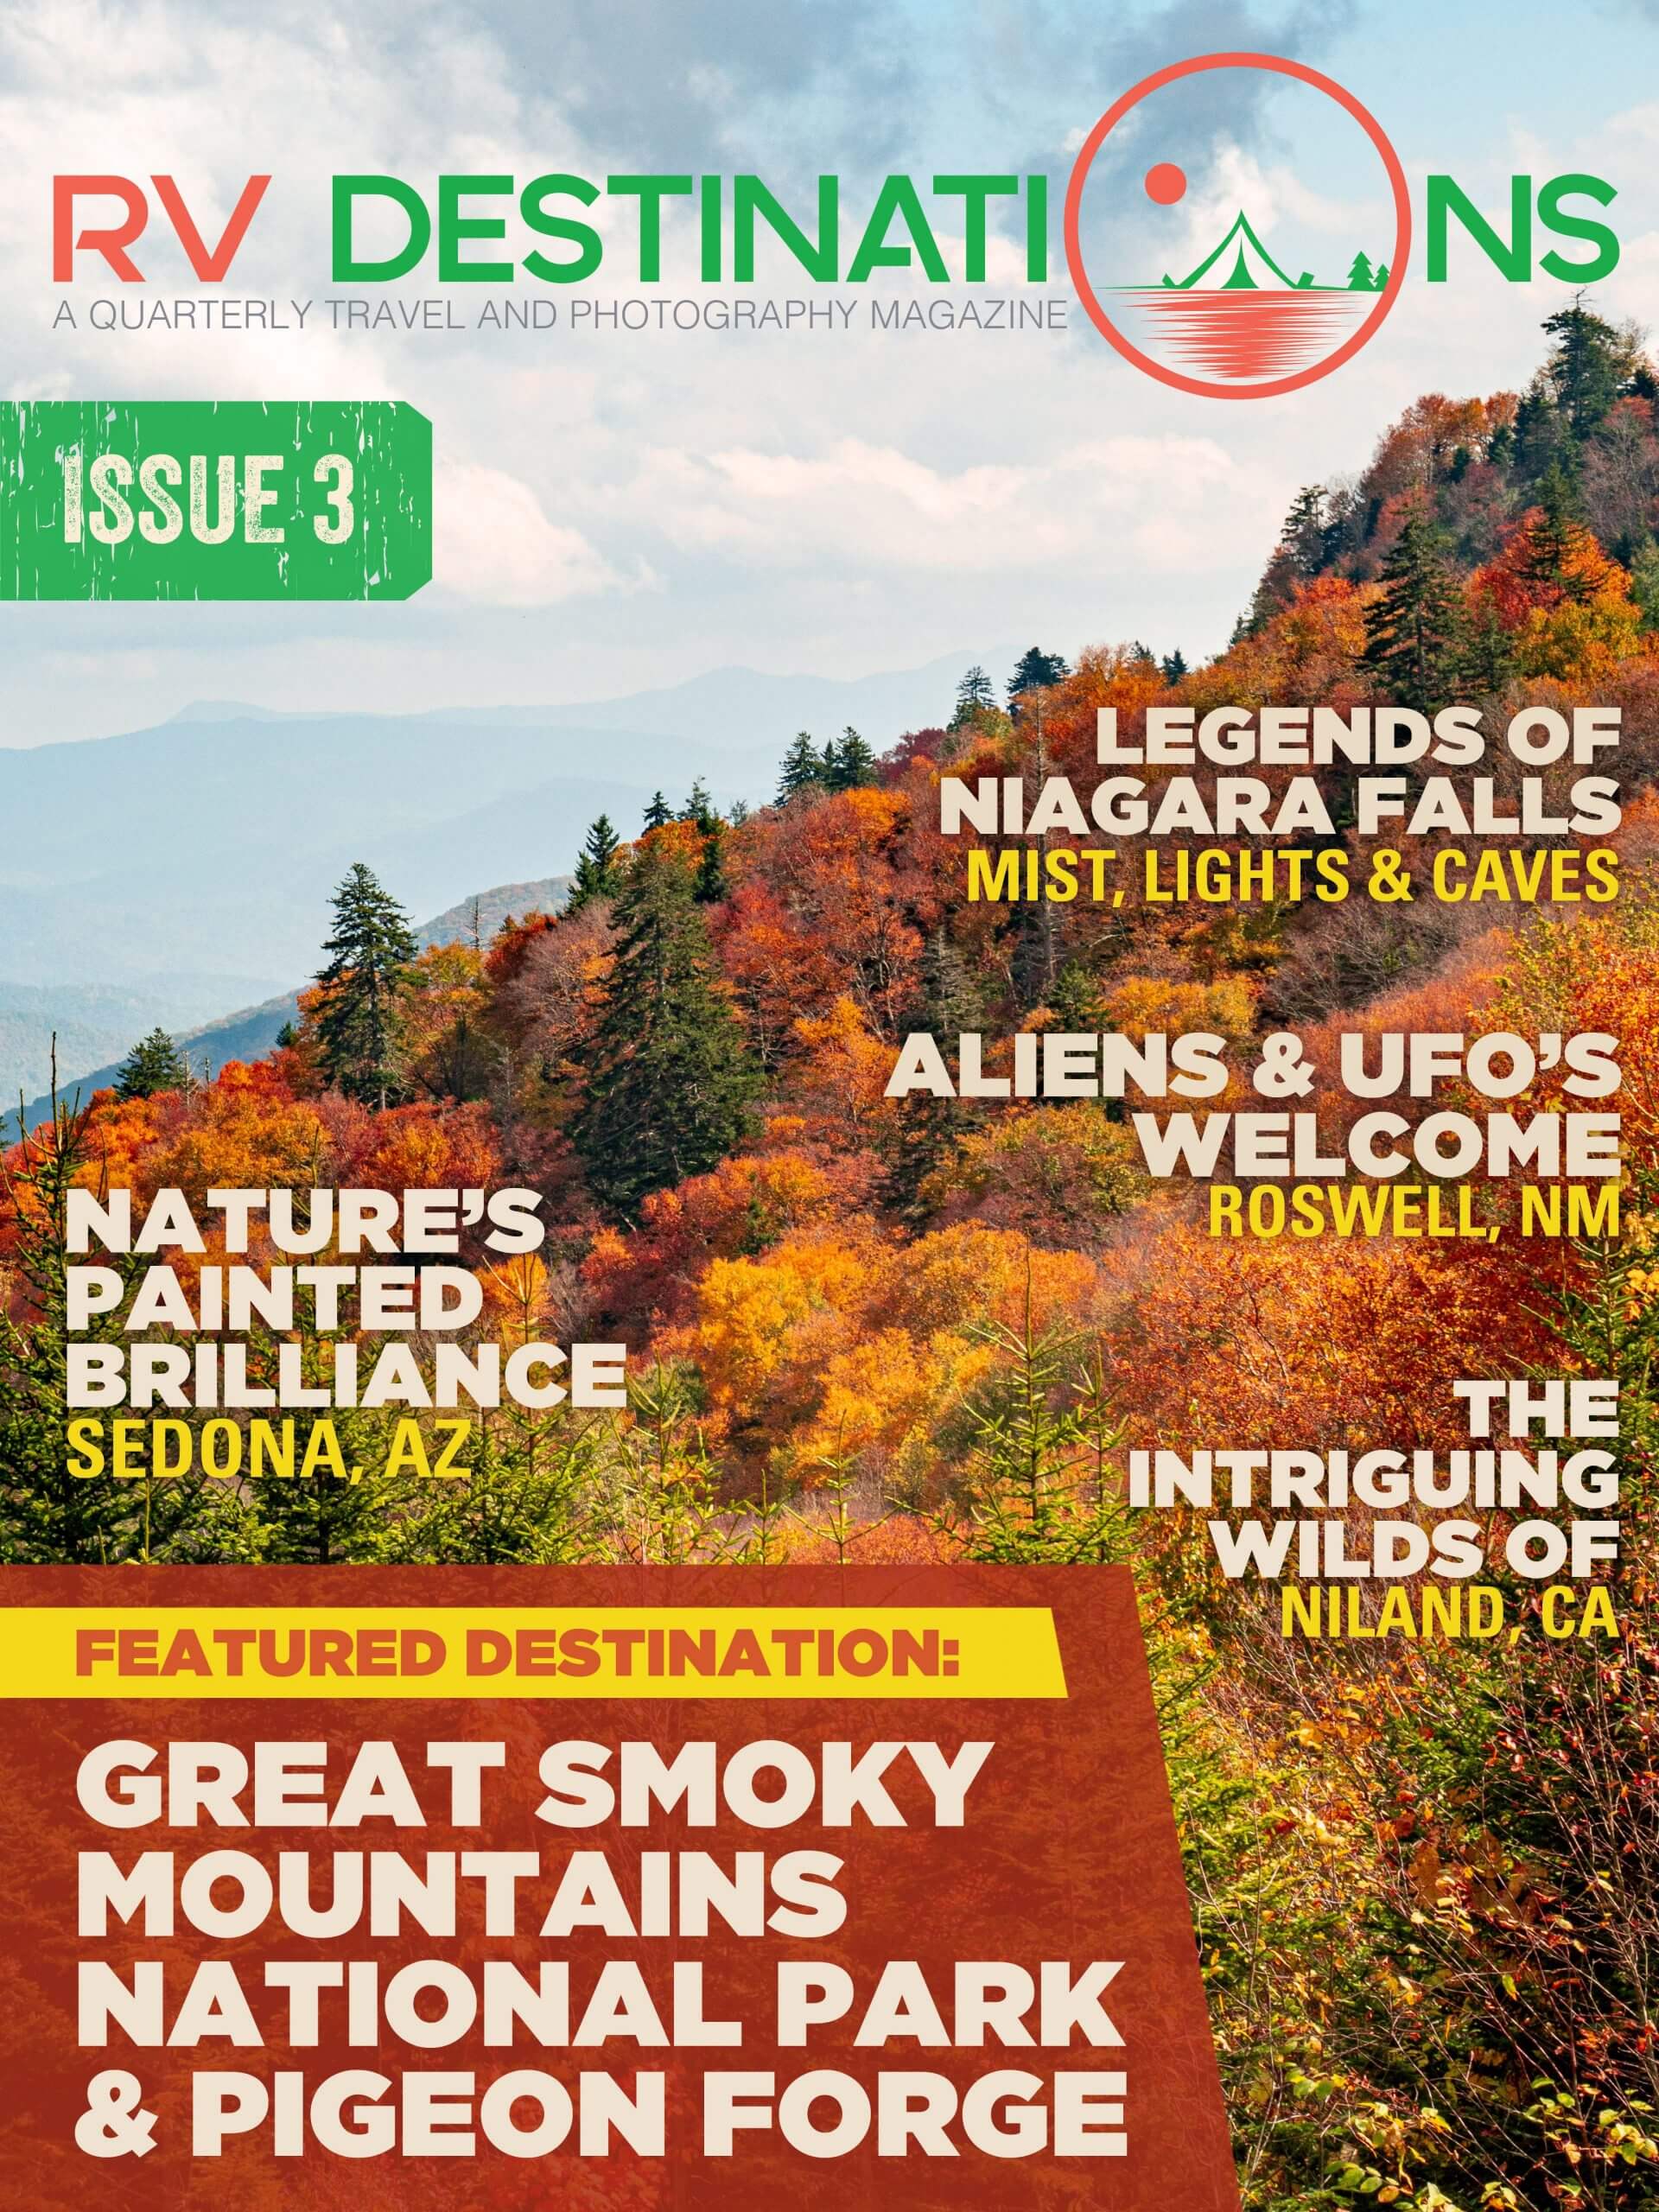 RV travel magazine cover highlighting Great Smoky Mountains.